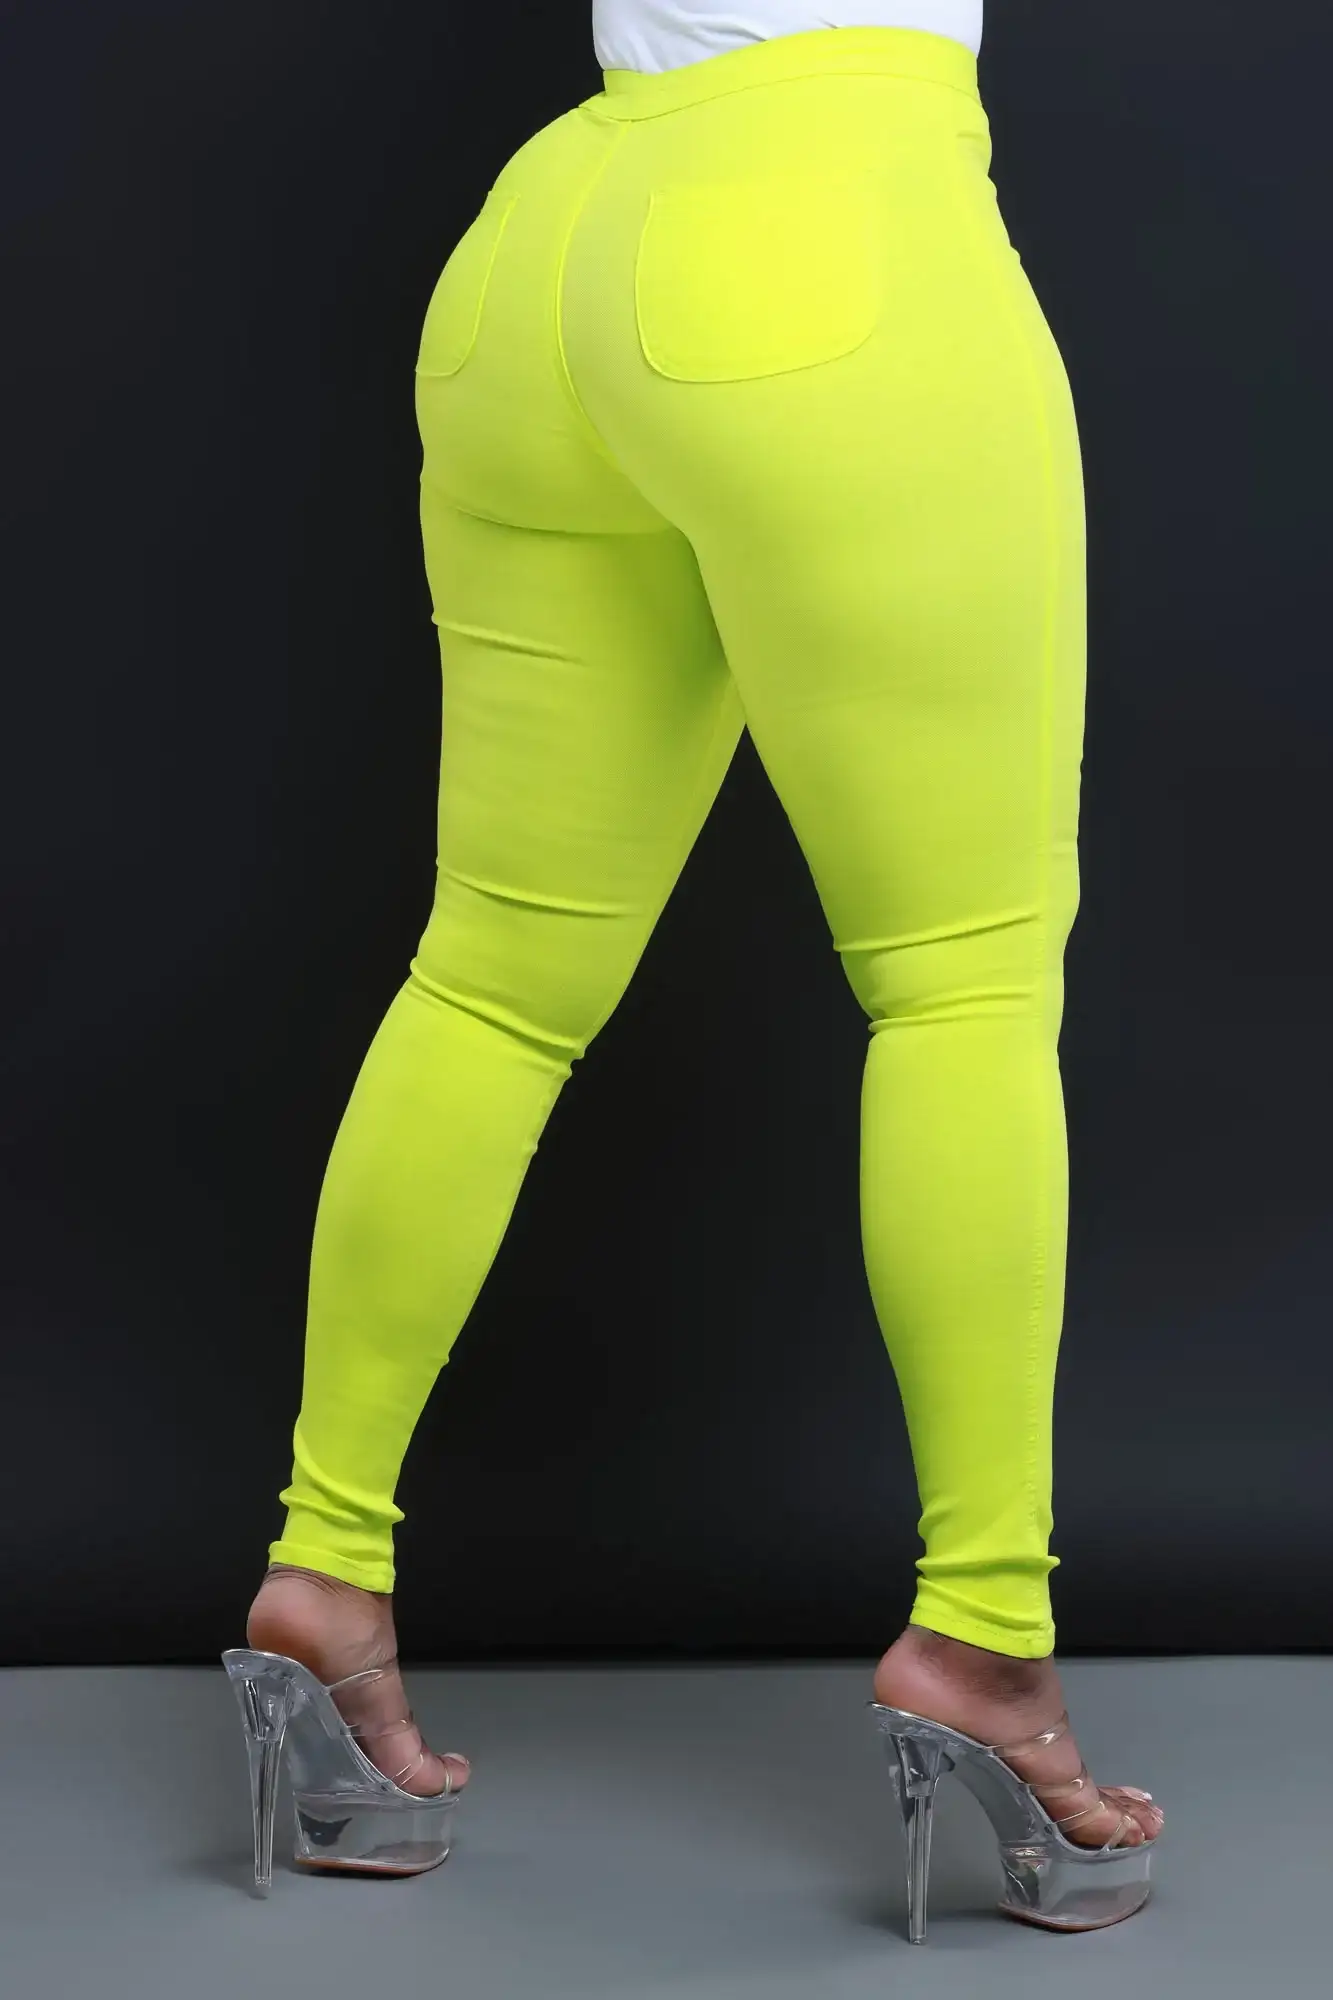 Image of \\$15.99 Super Swank High Waist Stretchy Jeans - Neon Yellow